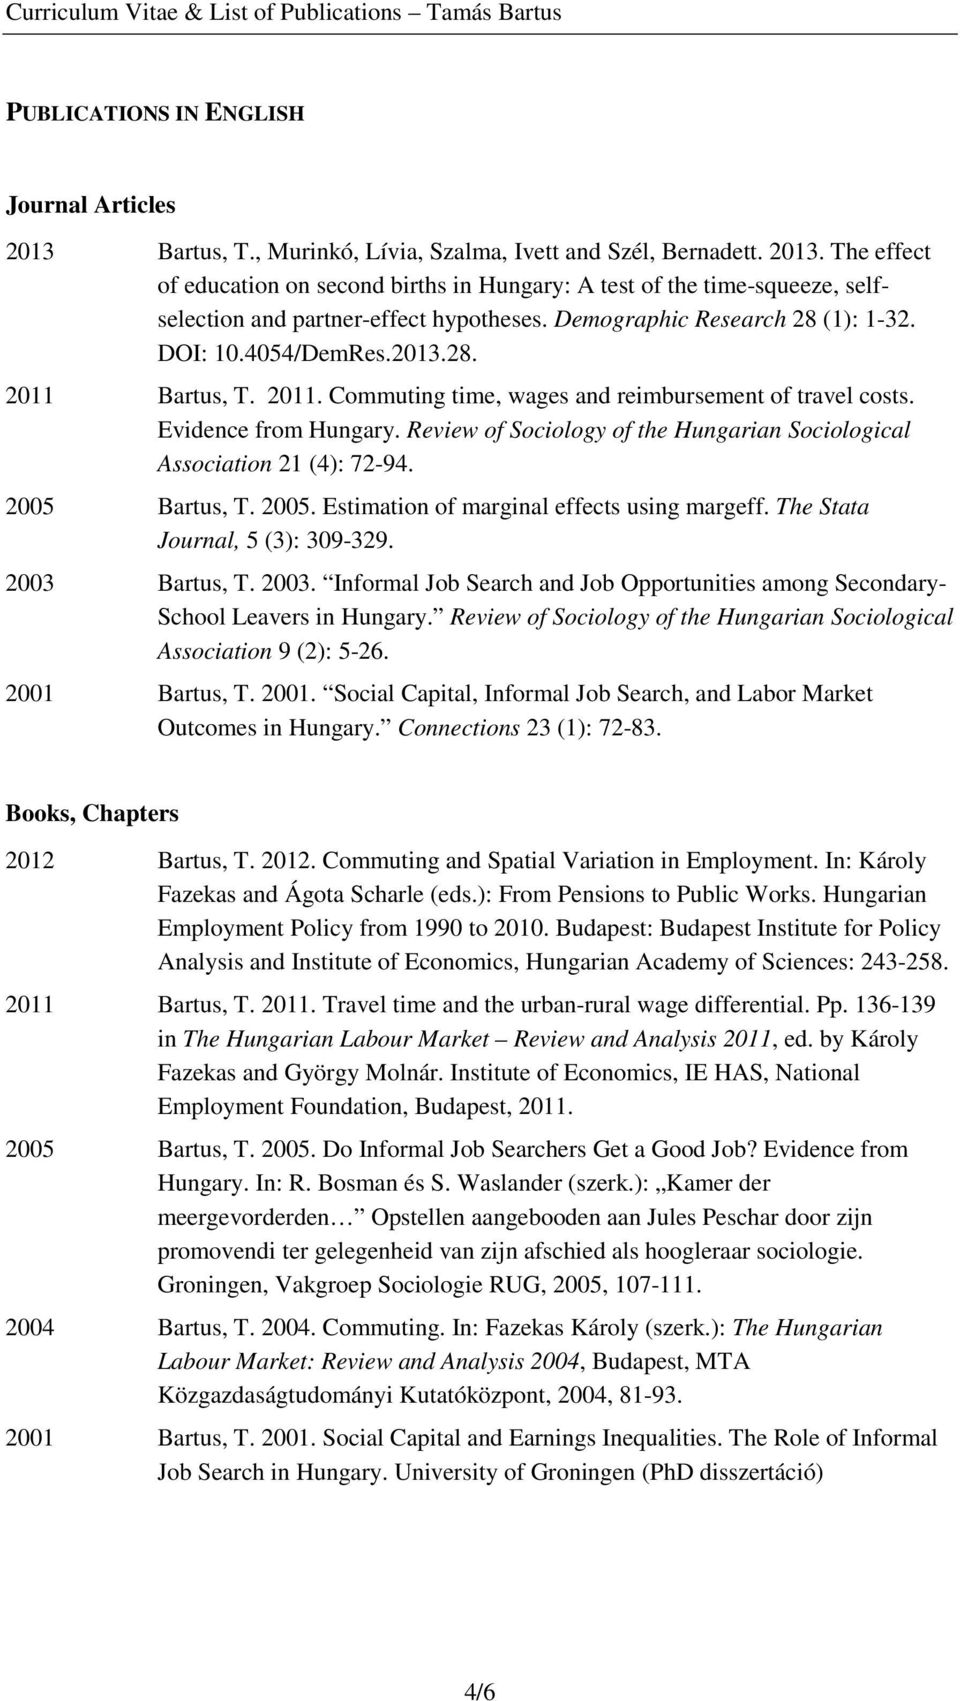 Review of Sociology of the Hungarian Sociological Association 21 (4): 72-94. 2005 Bartus, T. 2005. Estimation of marginal effects using margeff. The Stata Journal, 5 (3): 309-329. 2003 Bartus, T.